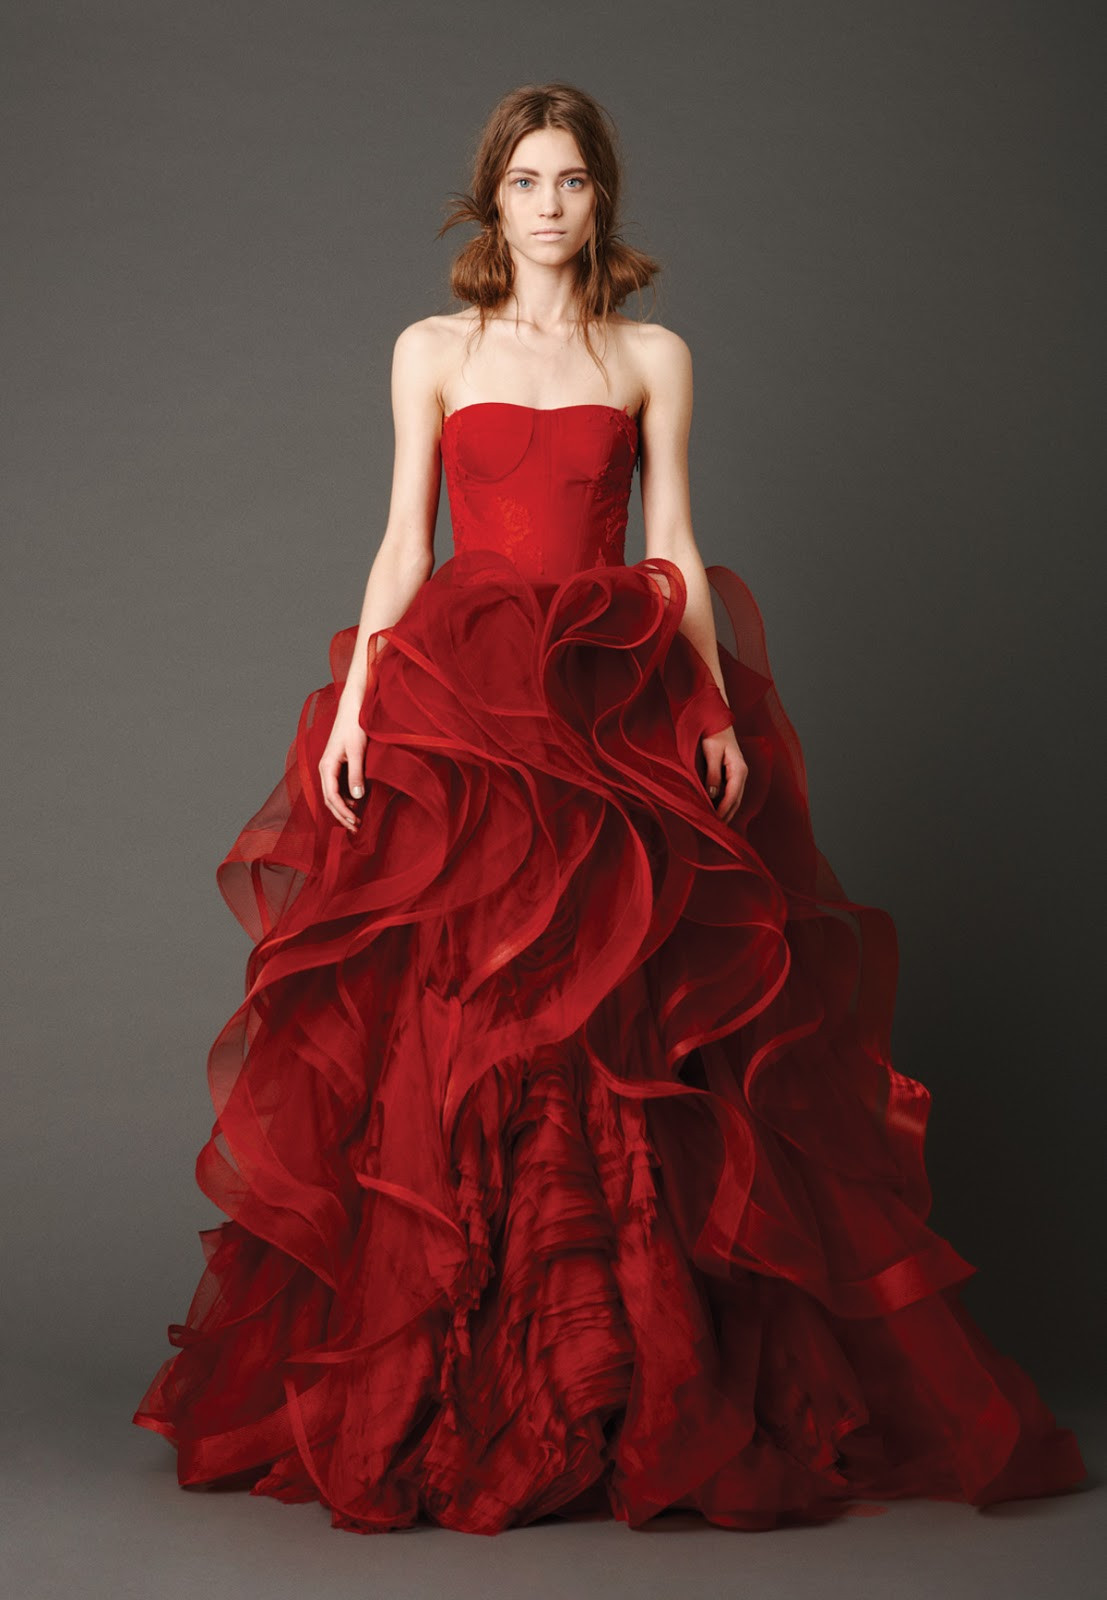 Red Ball Gown Wedding Dresses
 DressyBridal Learn Wedding Dresses 2013 Trends from Vera